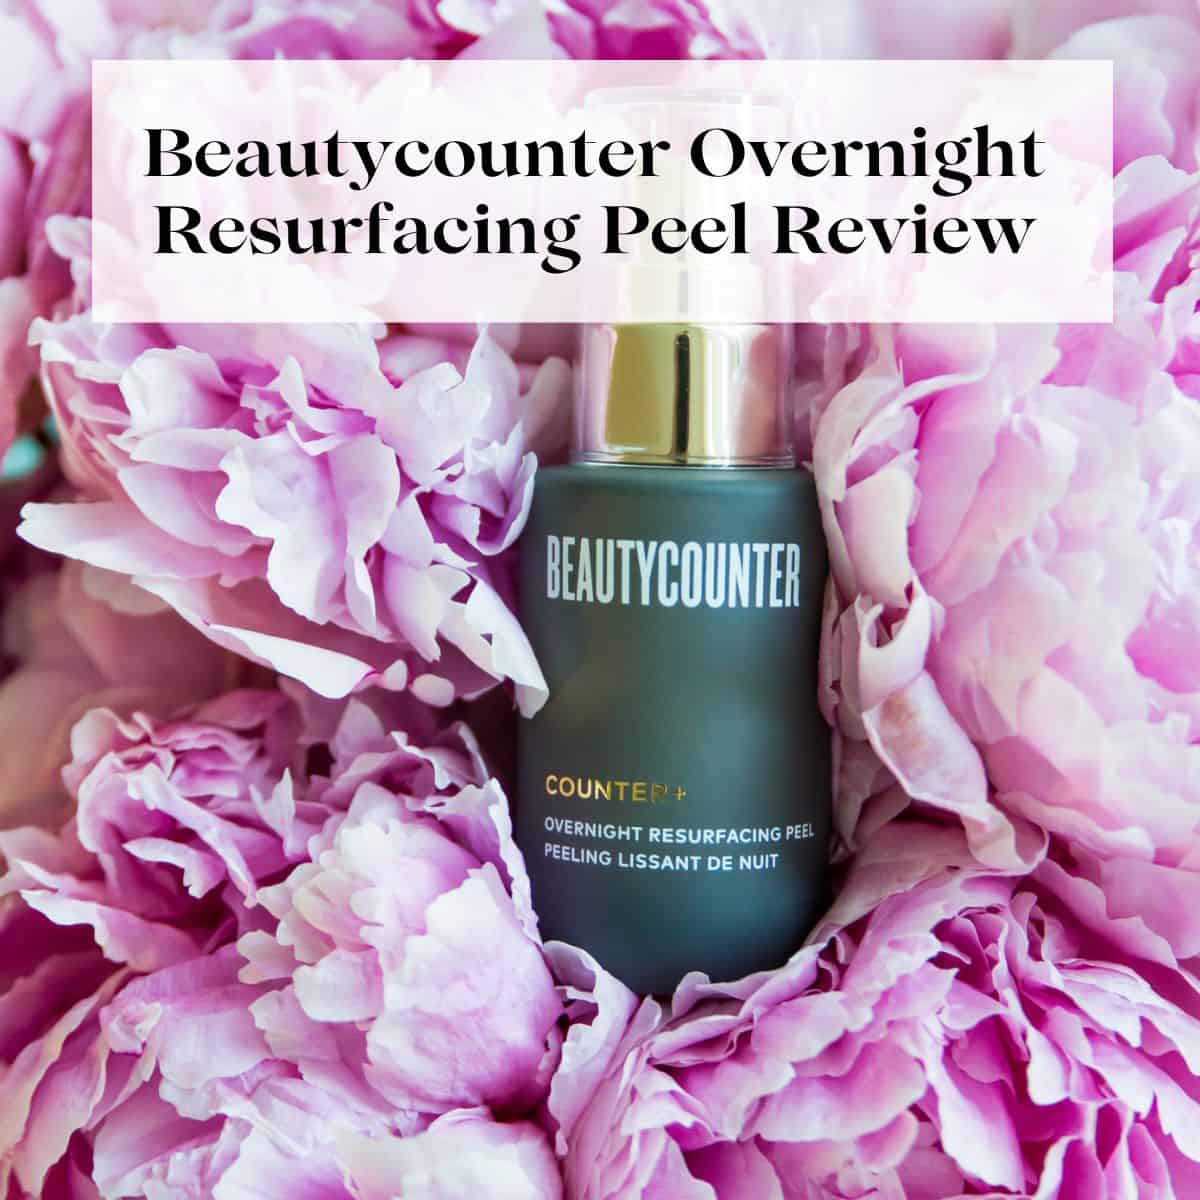 A bottle of the Beautycounter Overnight Resurfacing Peel in a bunch of peonies with the title "Beautycounter overnight resurfacing peel review" over it.